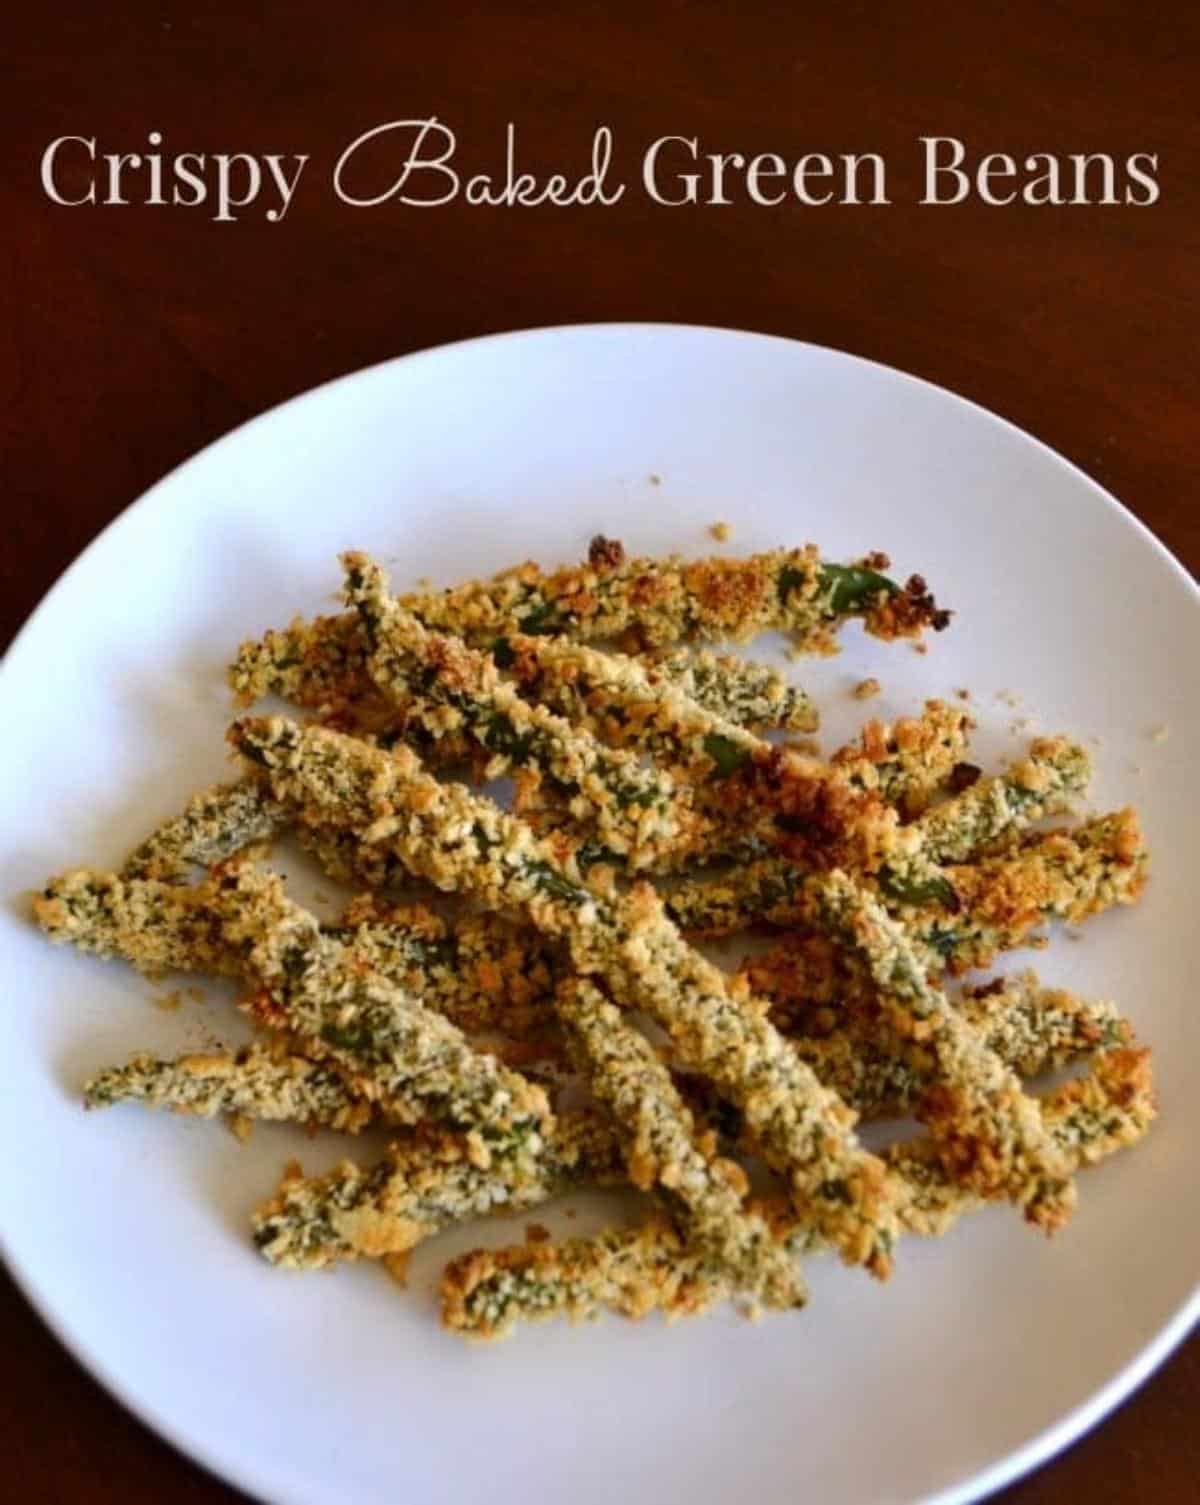 Crispy baked green beans on a plate with text title Crispy Baked Green Beans.